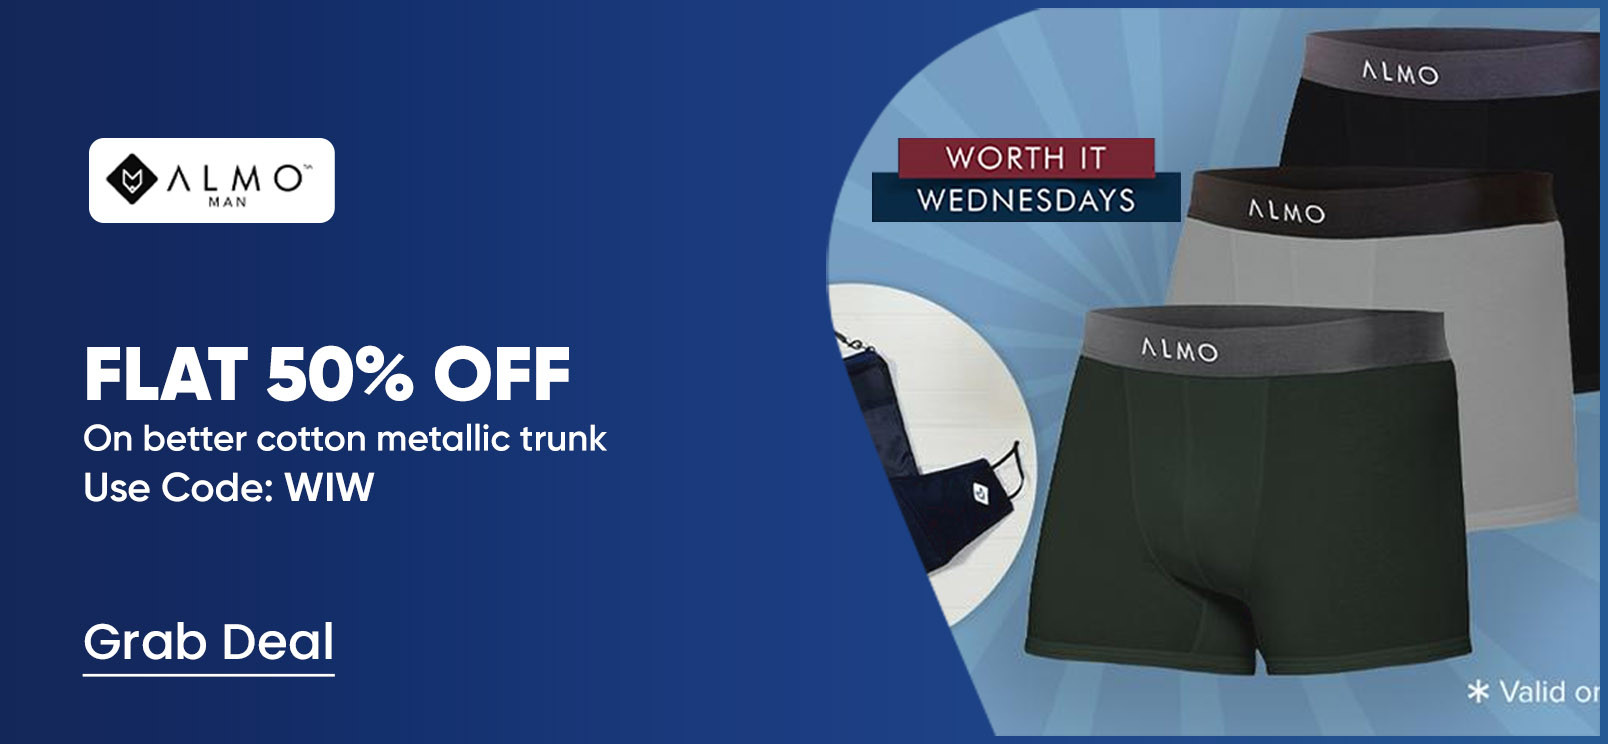 Almo Worth It Wednesday | Flat 50% OFF On Better Cotton Metallic Trunks + Free Pouch Worth Rs. 499